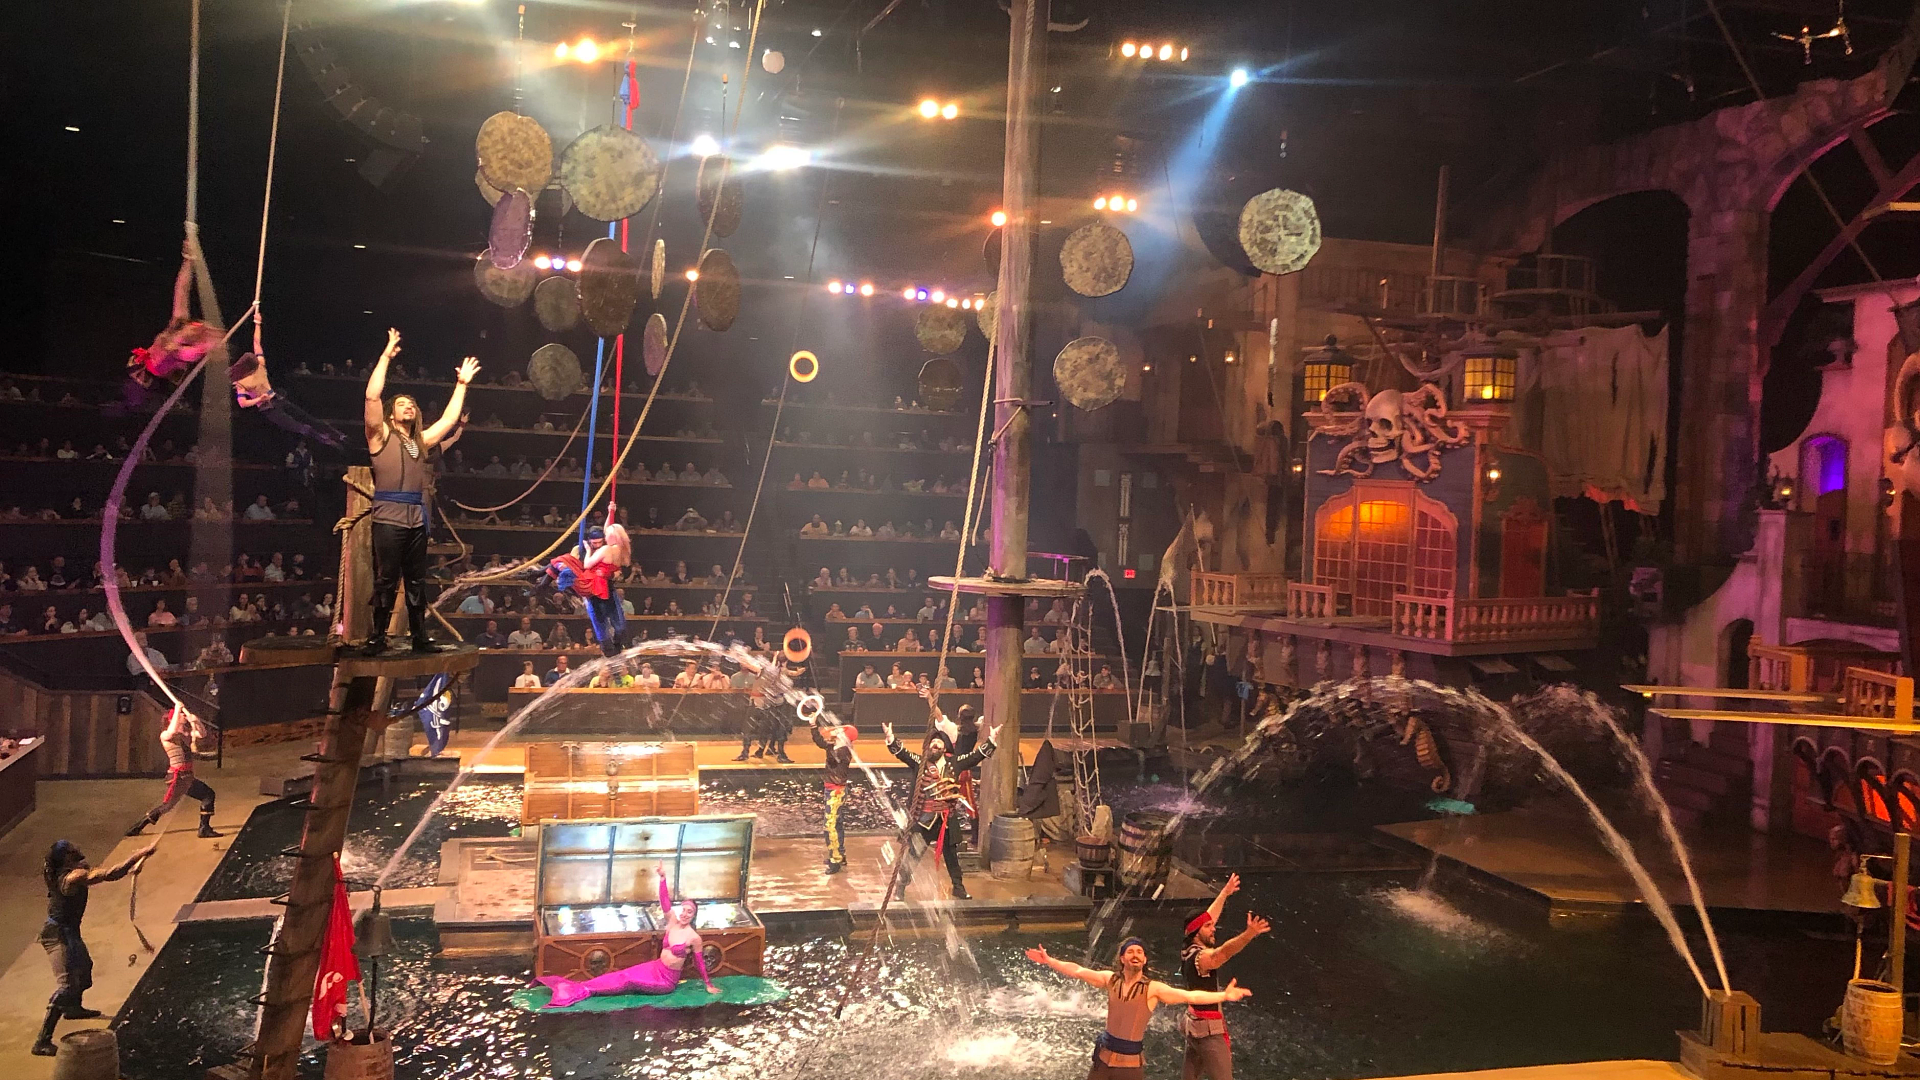 Come Find the Treasure That is Pirate’s Voyage Dinner & Show